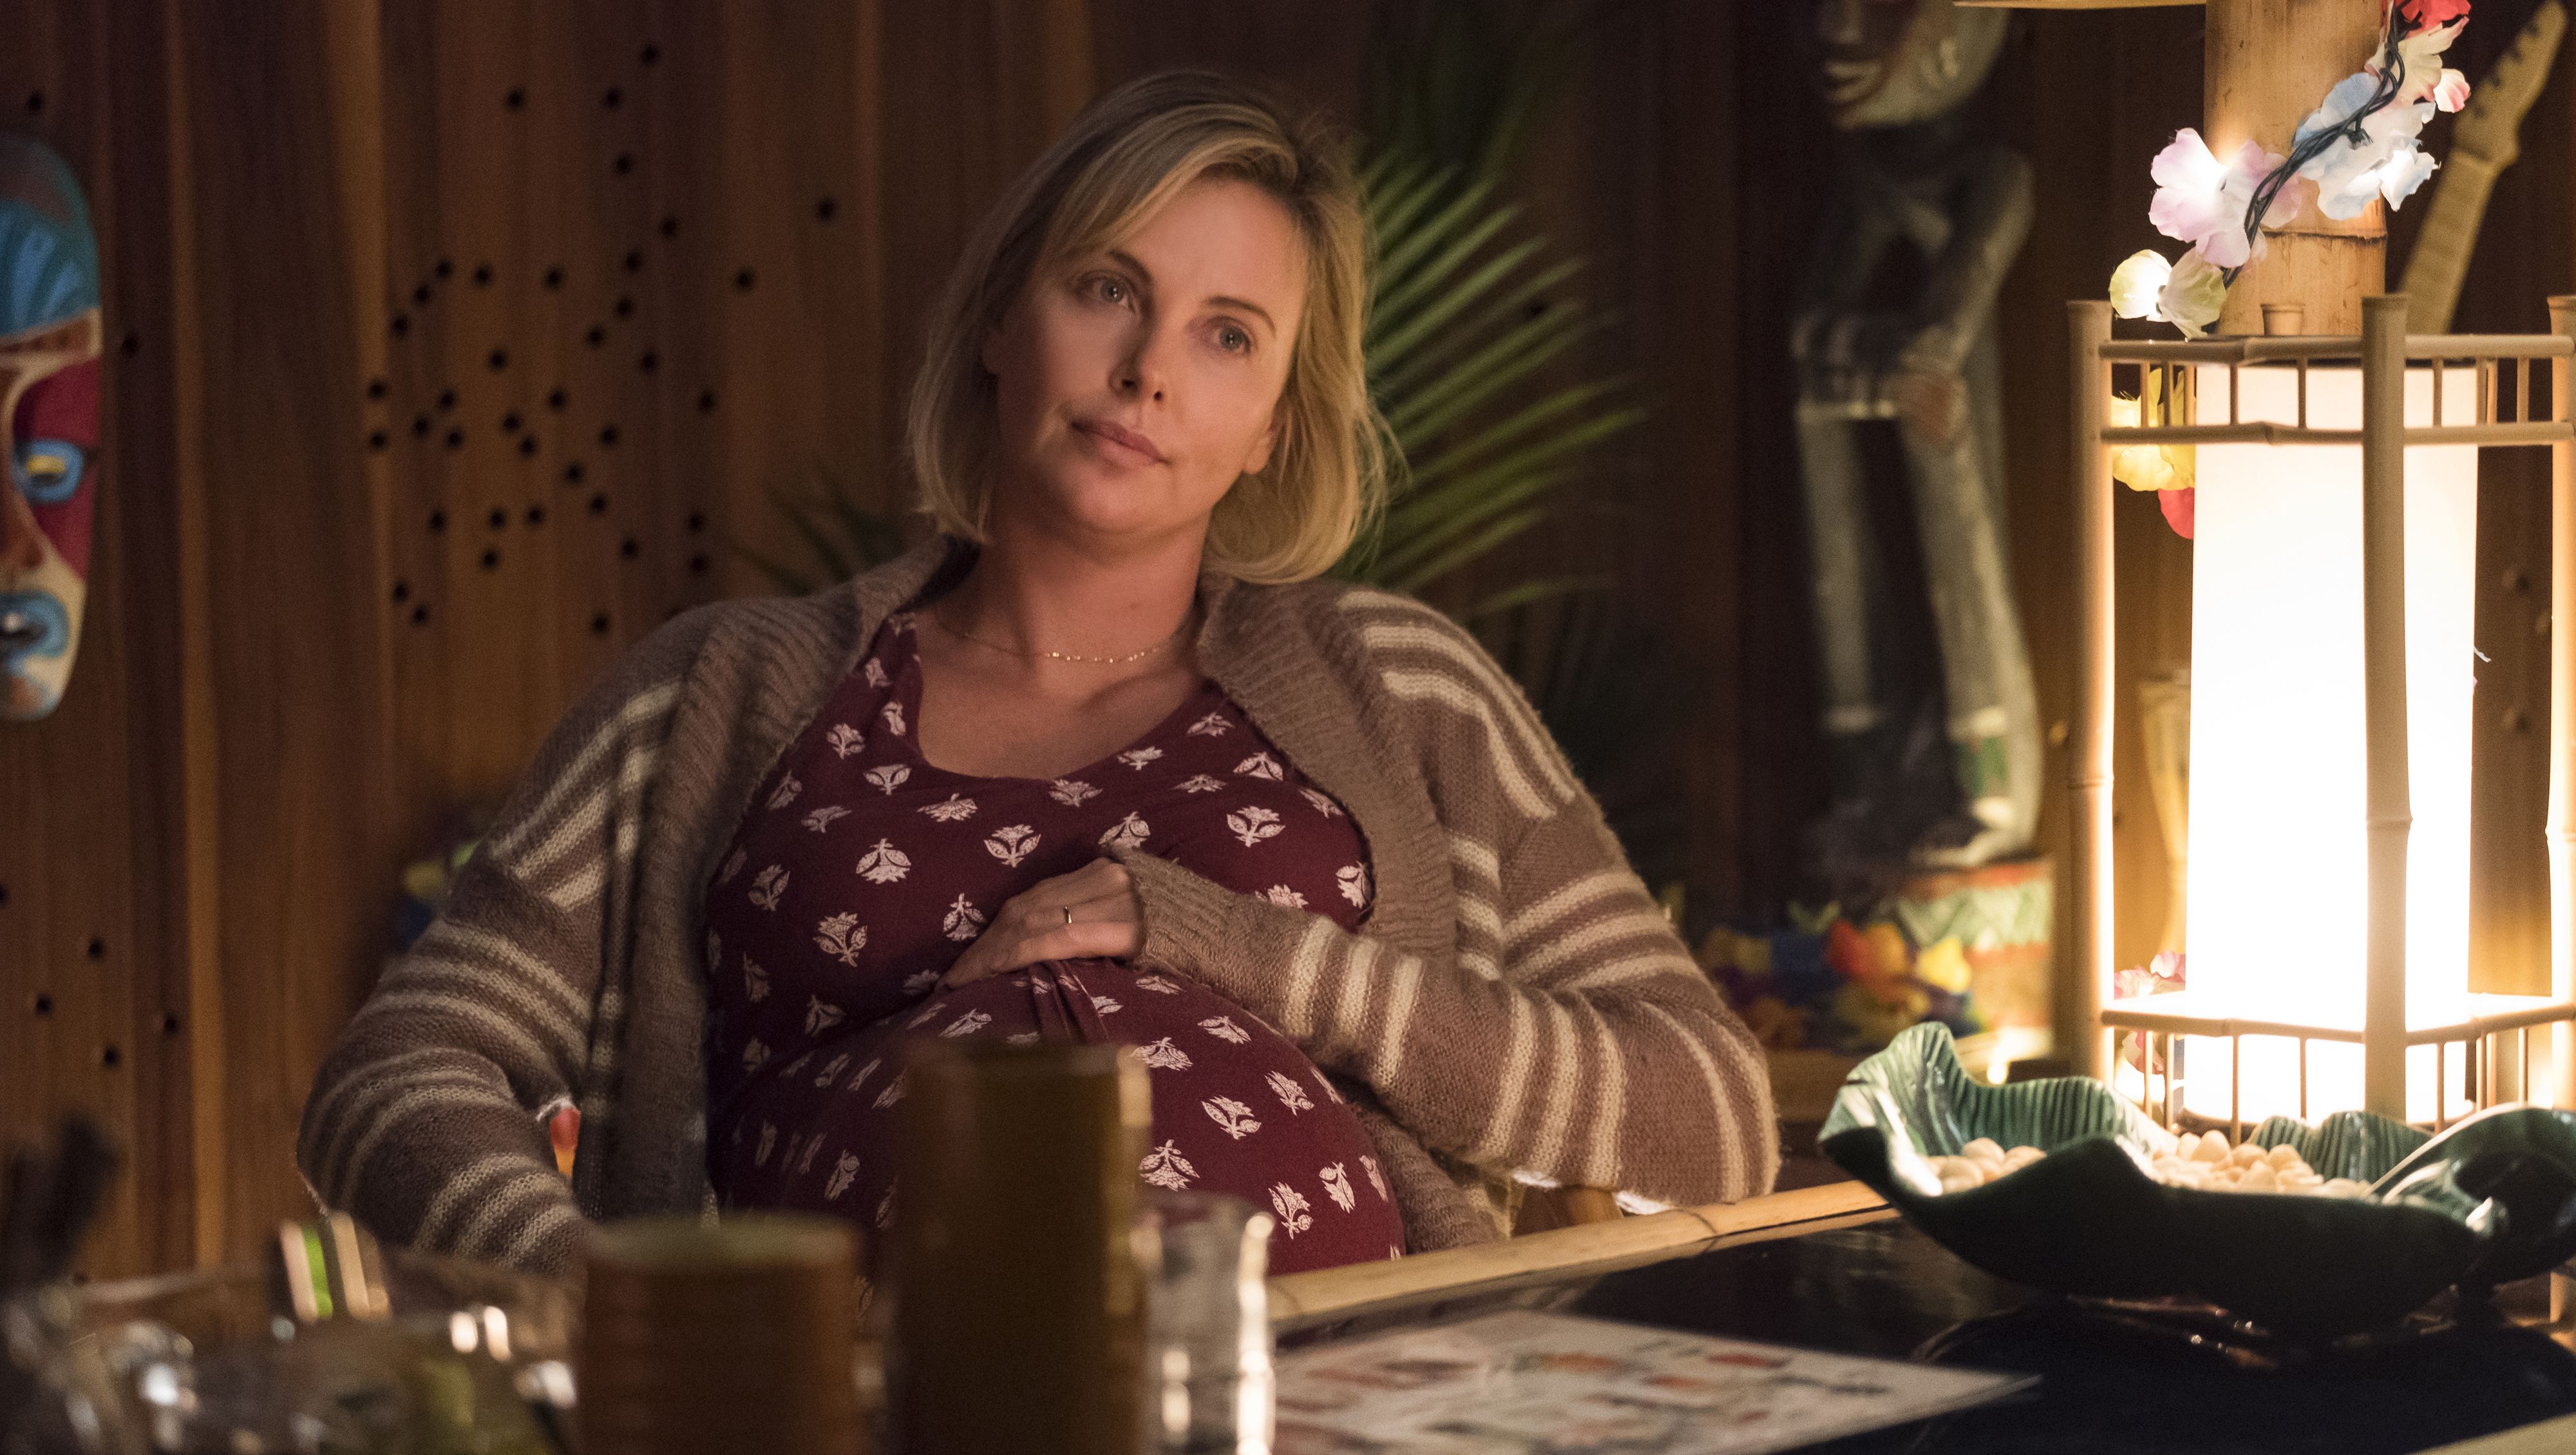 Charlize Theron's Poignant 'Tully' Is A Messy Every Mom Story (review)